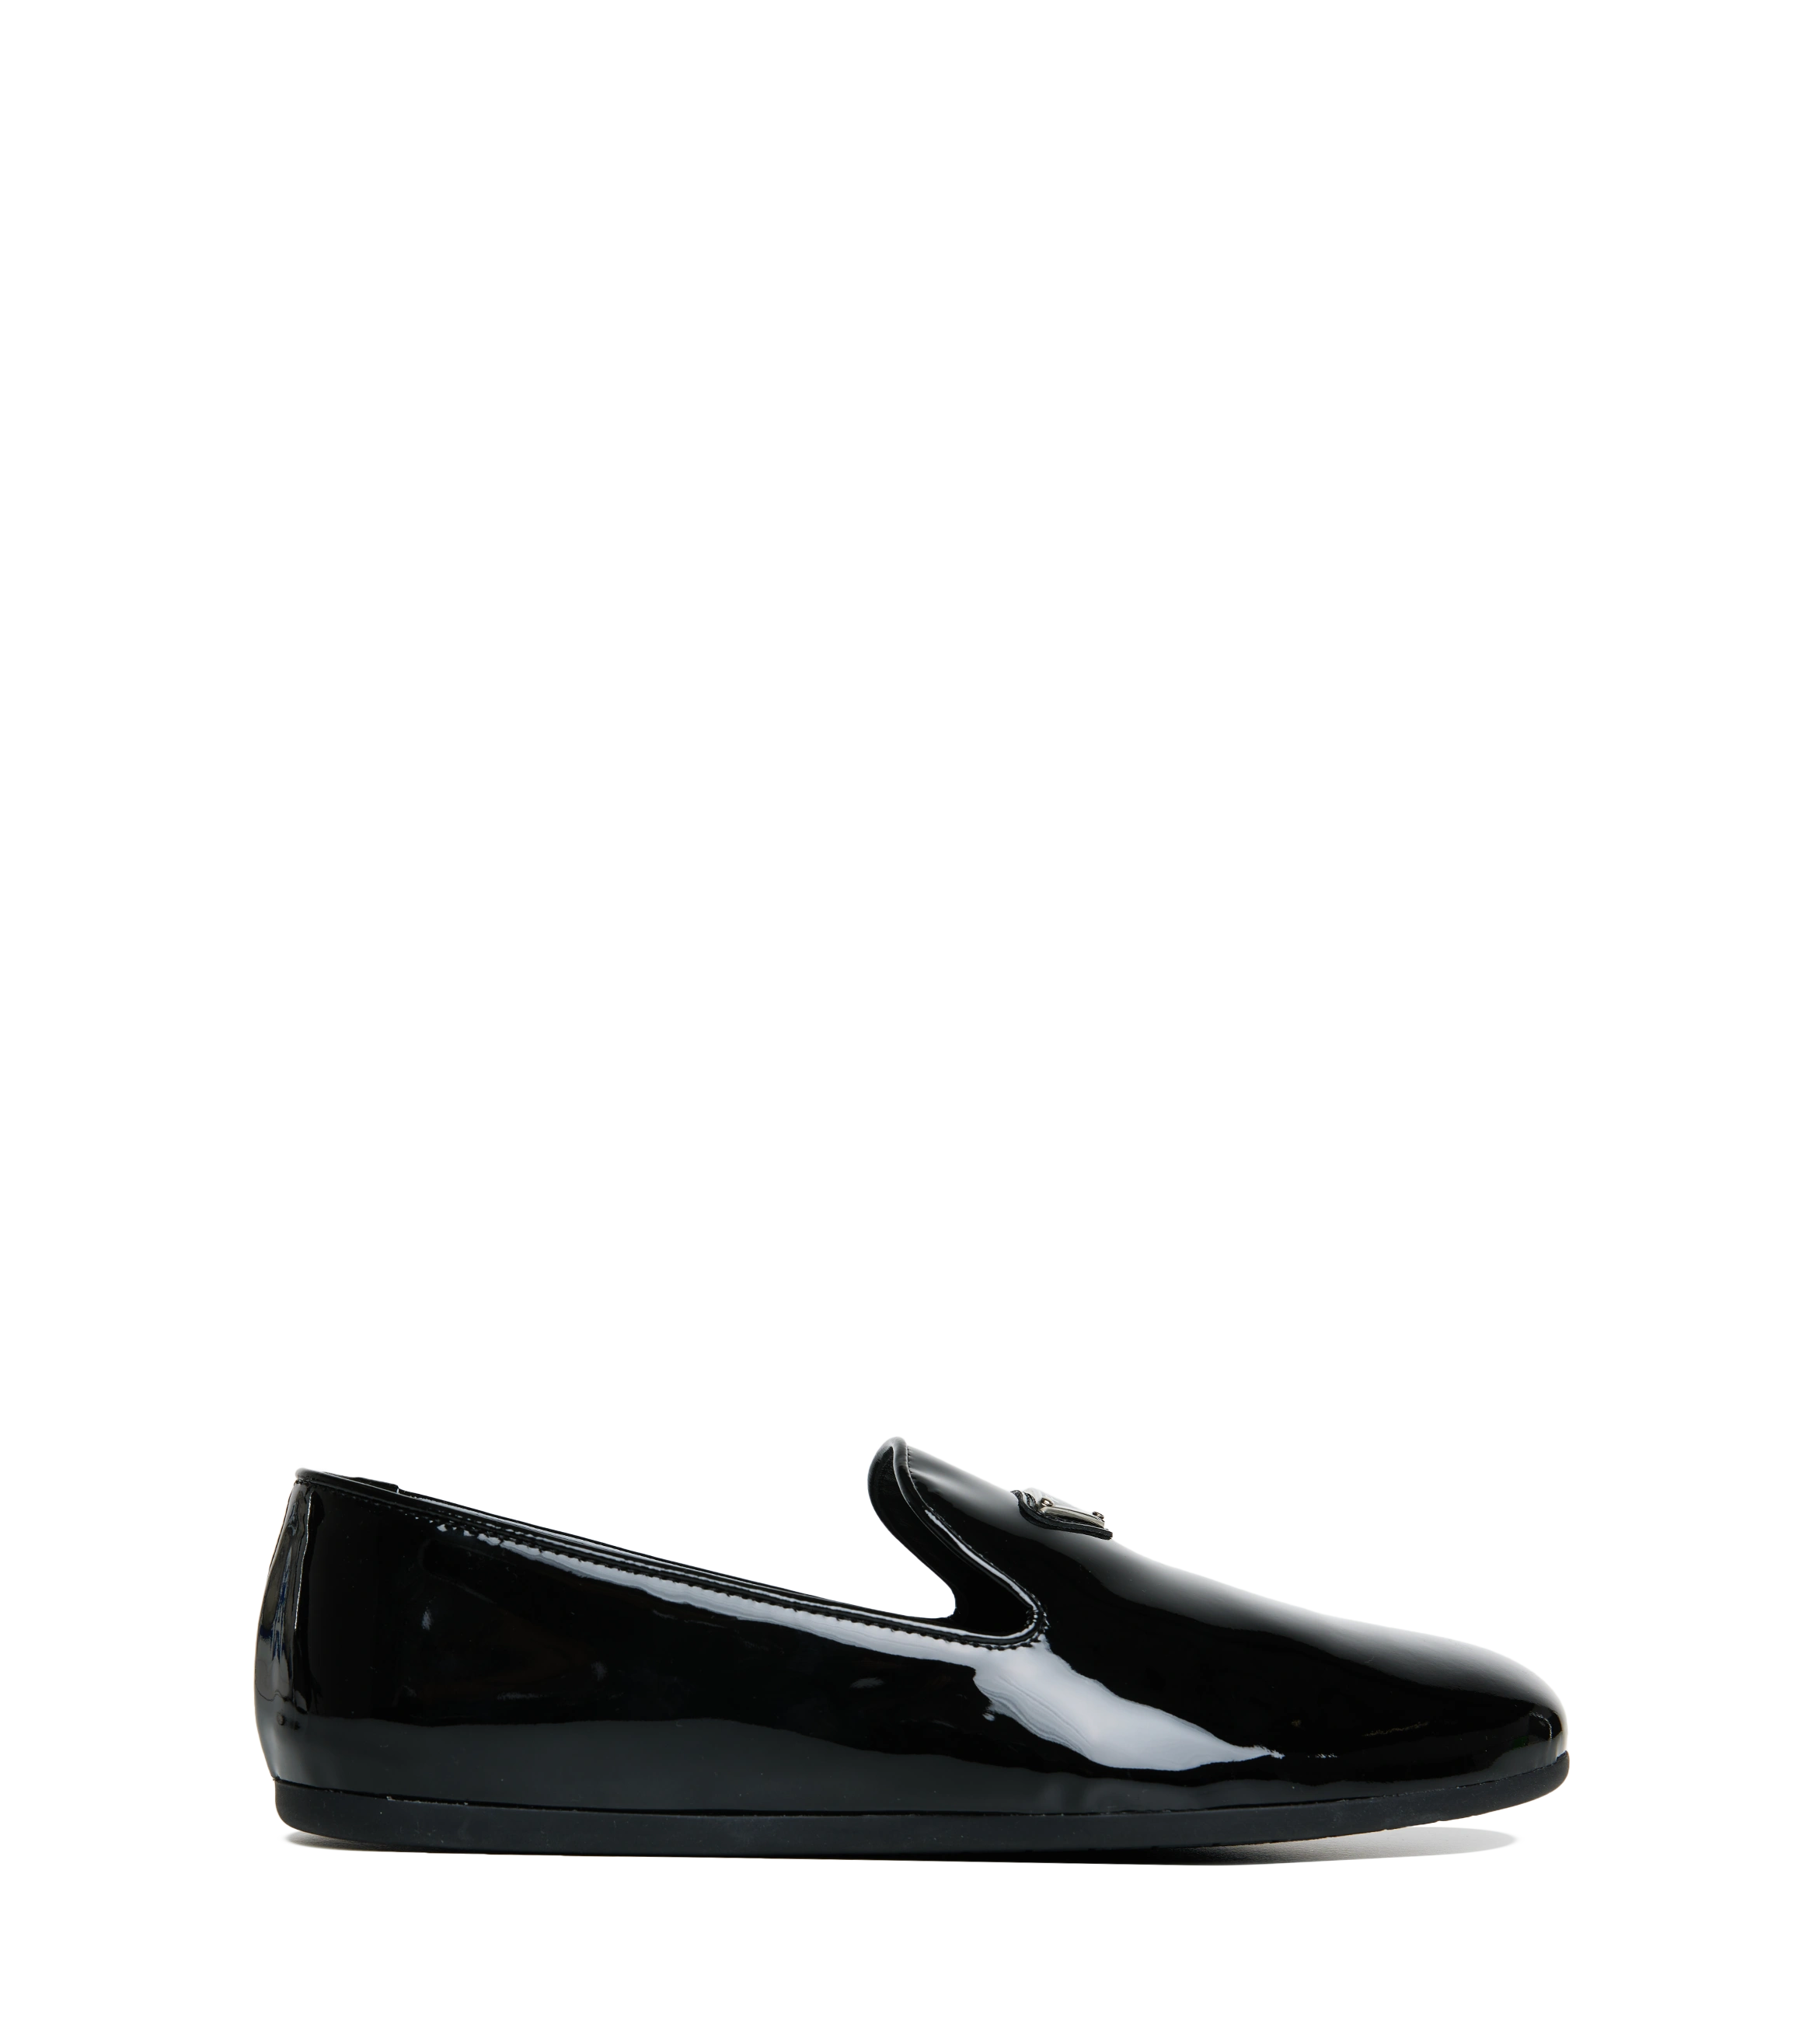 Patent Leather Slip-on Shoes Black